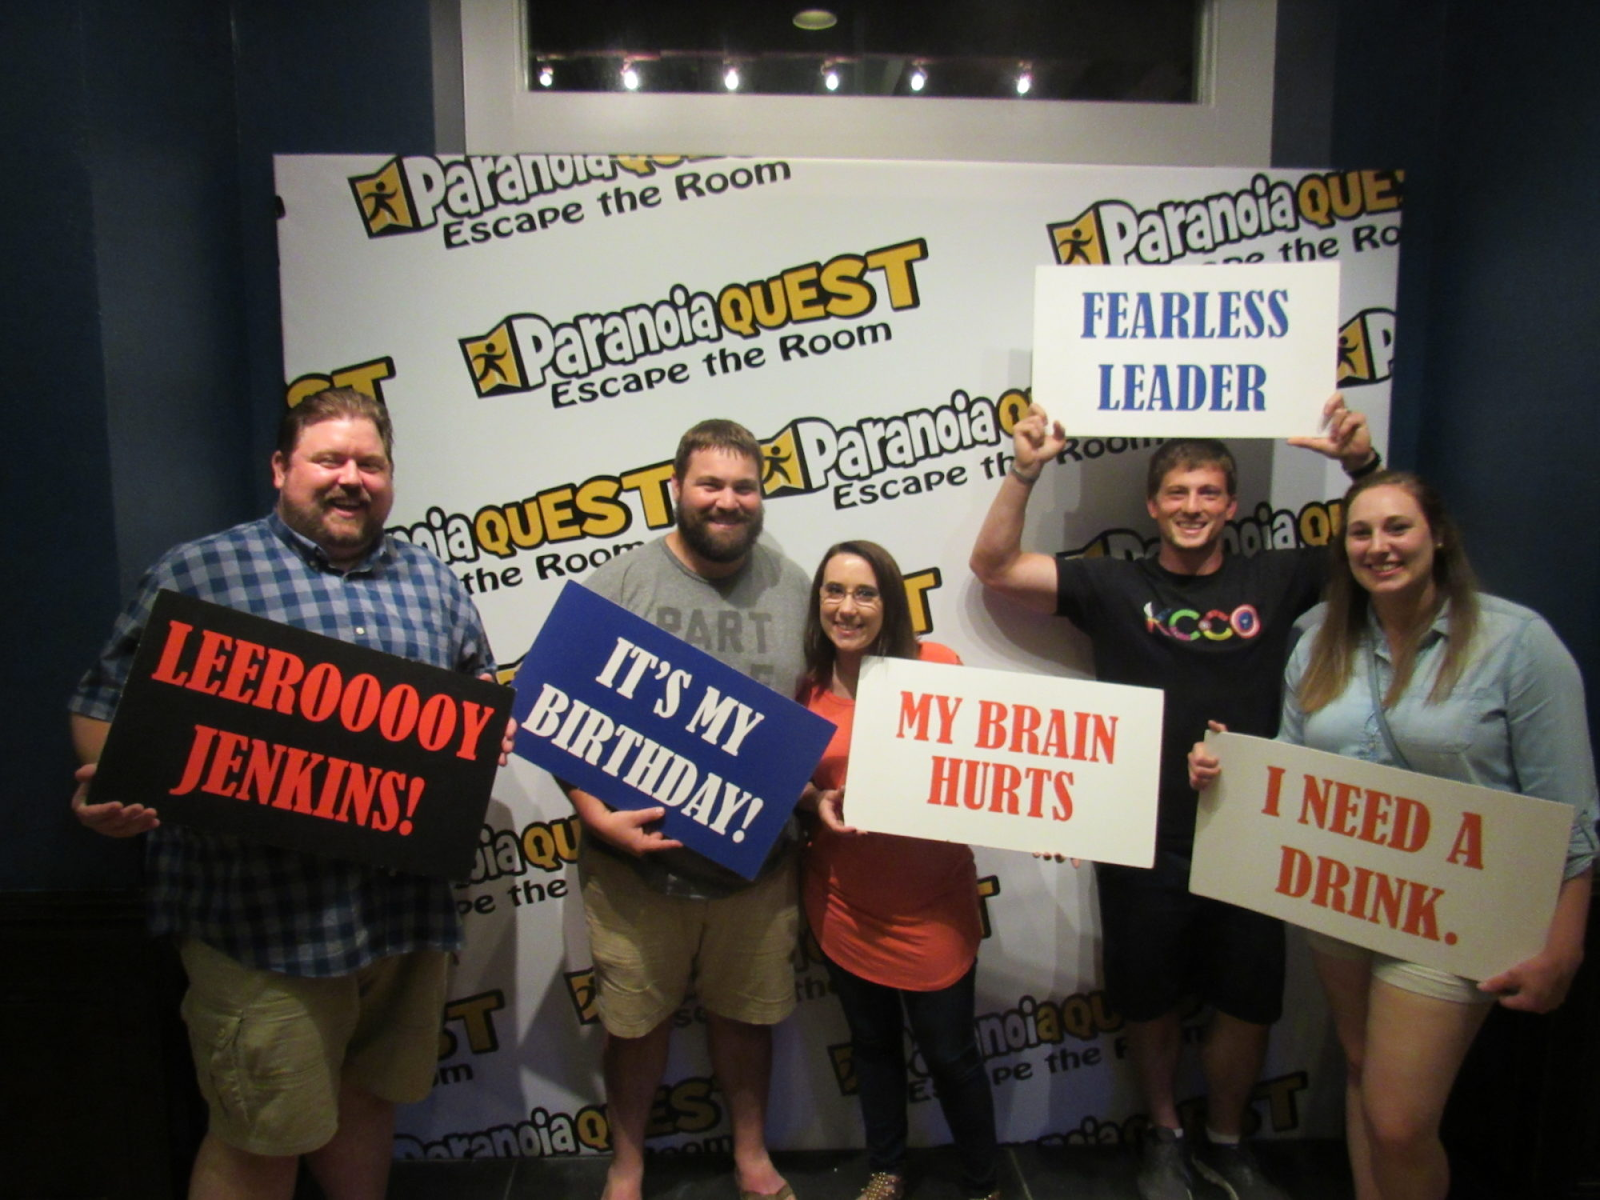 A group of friends posing with banners, celebrating their victory after winning an escape game at Paranoia Quest.